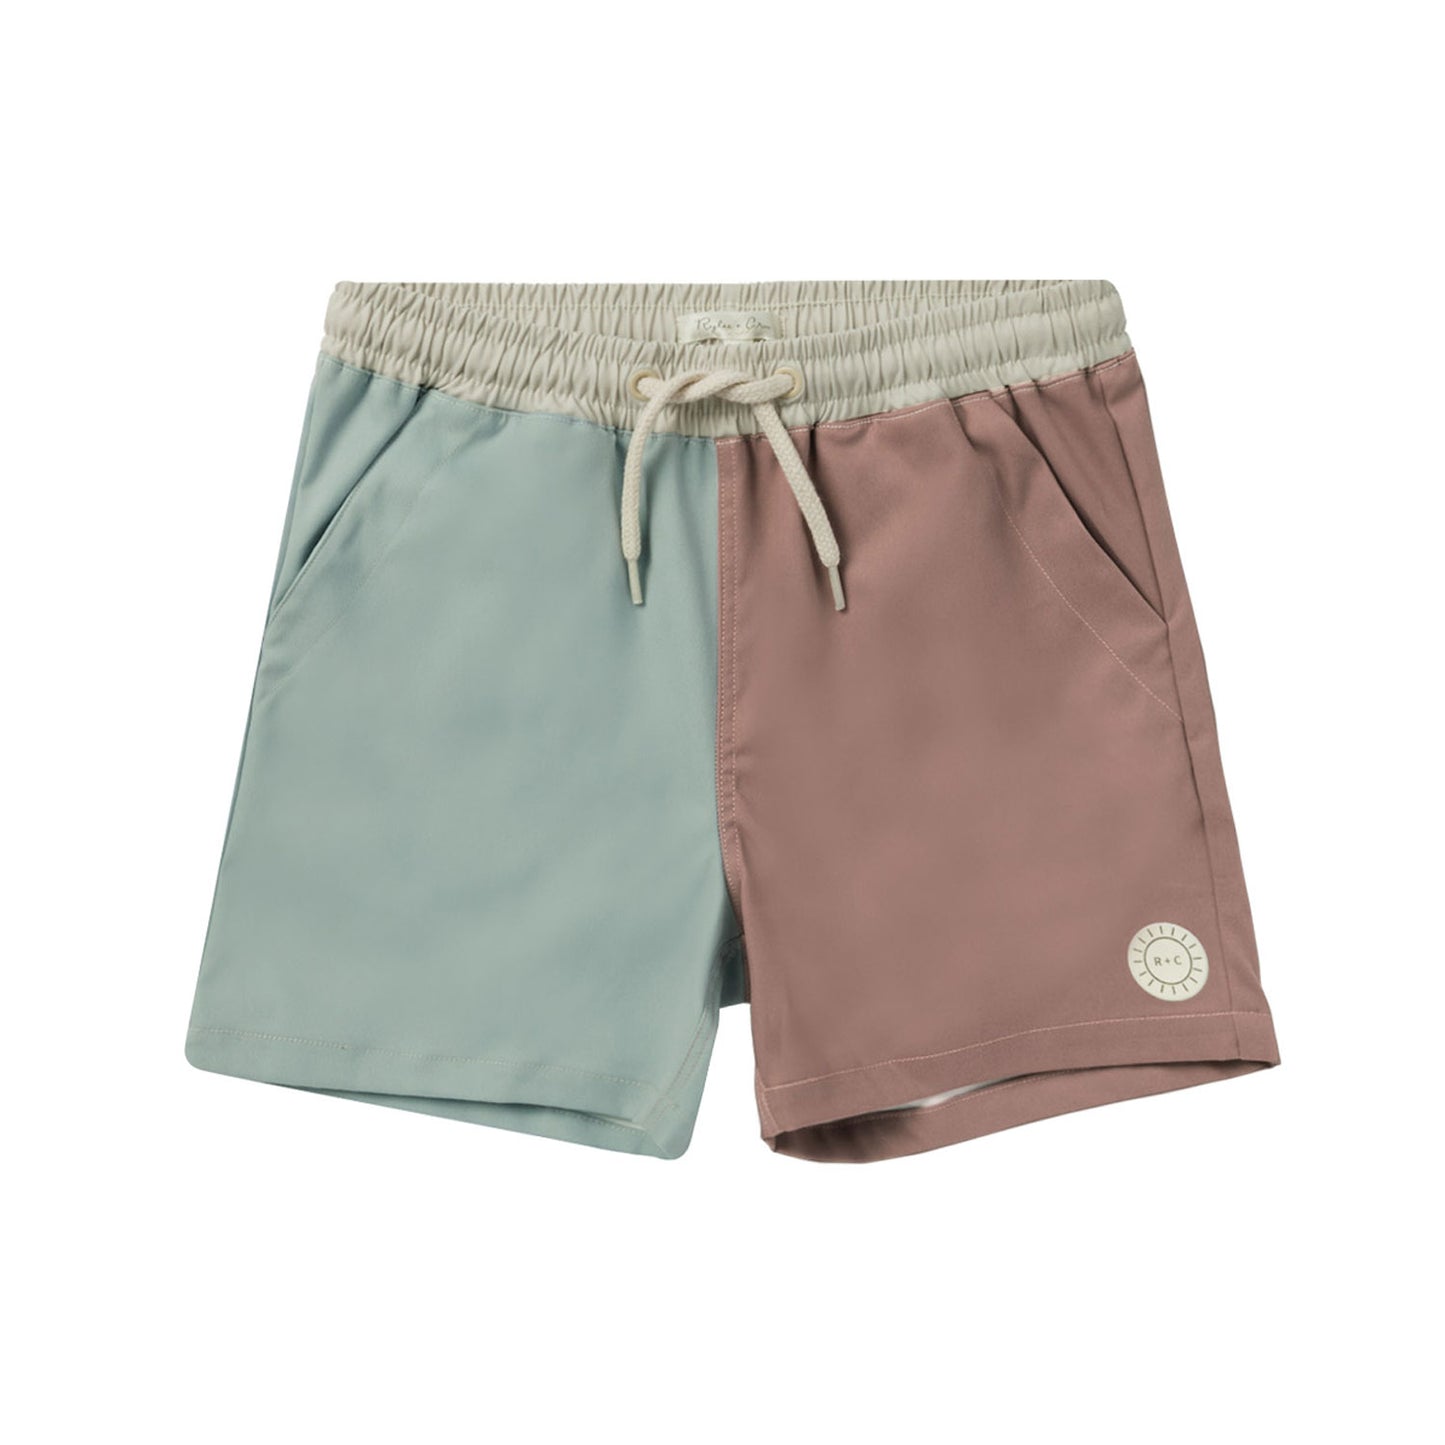 Rylee and Cru Boardshort Swimsuit - Mulberry / Blue